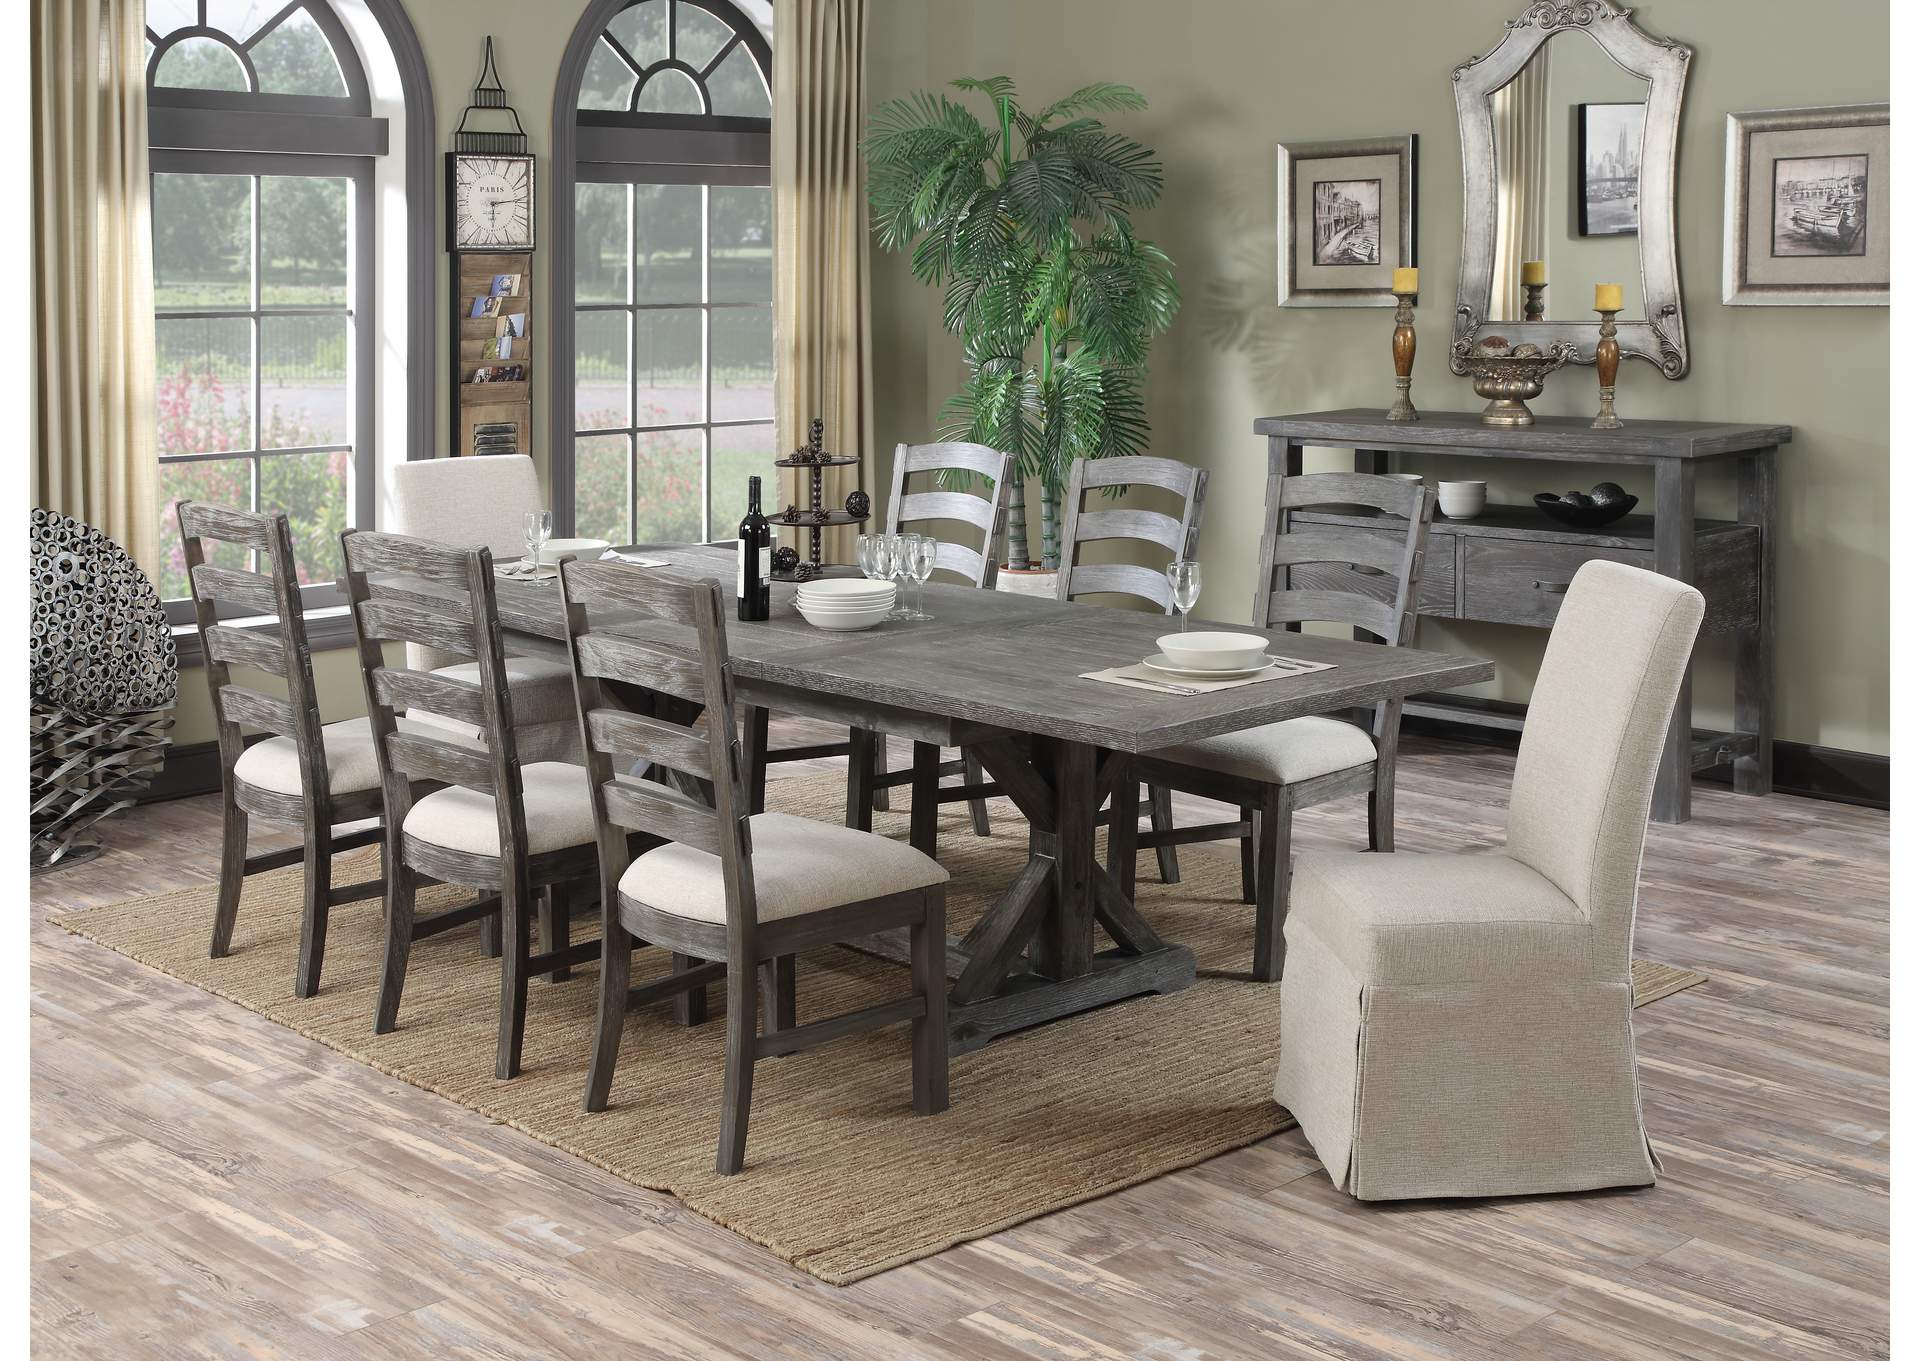 Paladin Butterfly Leaf Dining Table,Emerald Home Furnishings